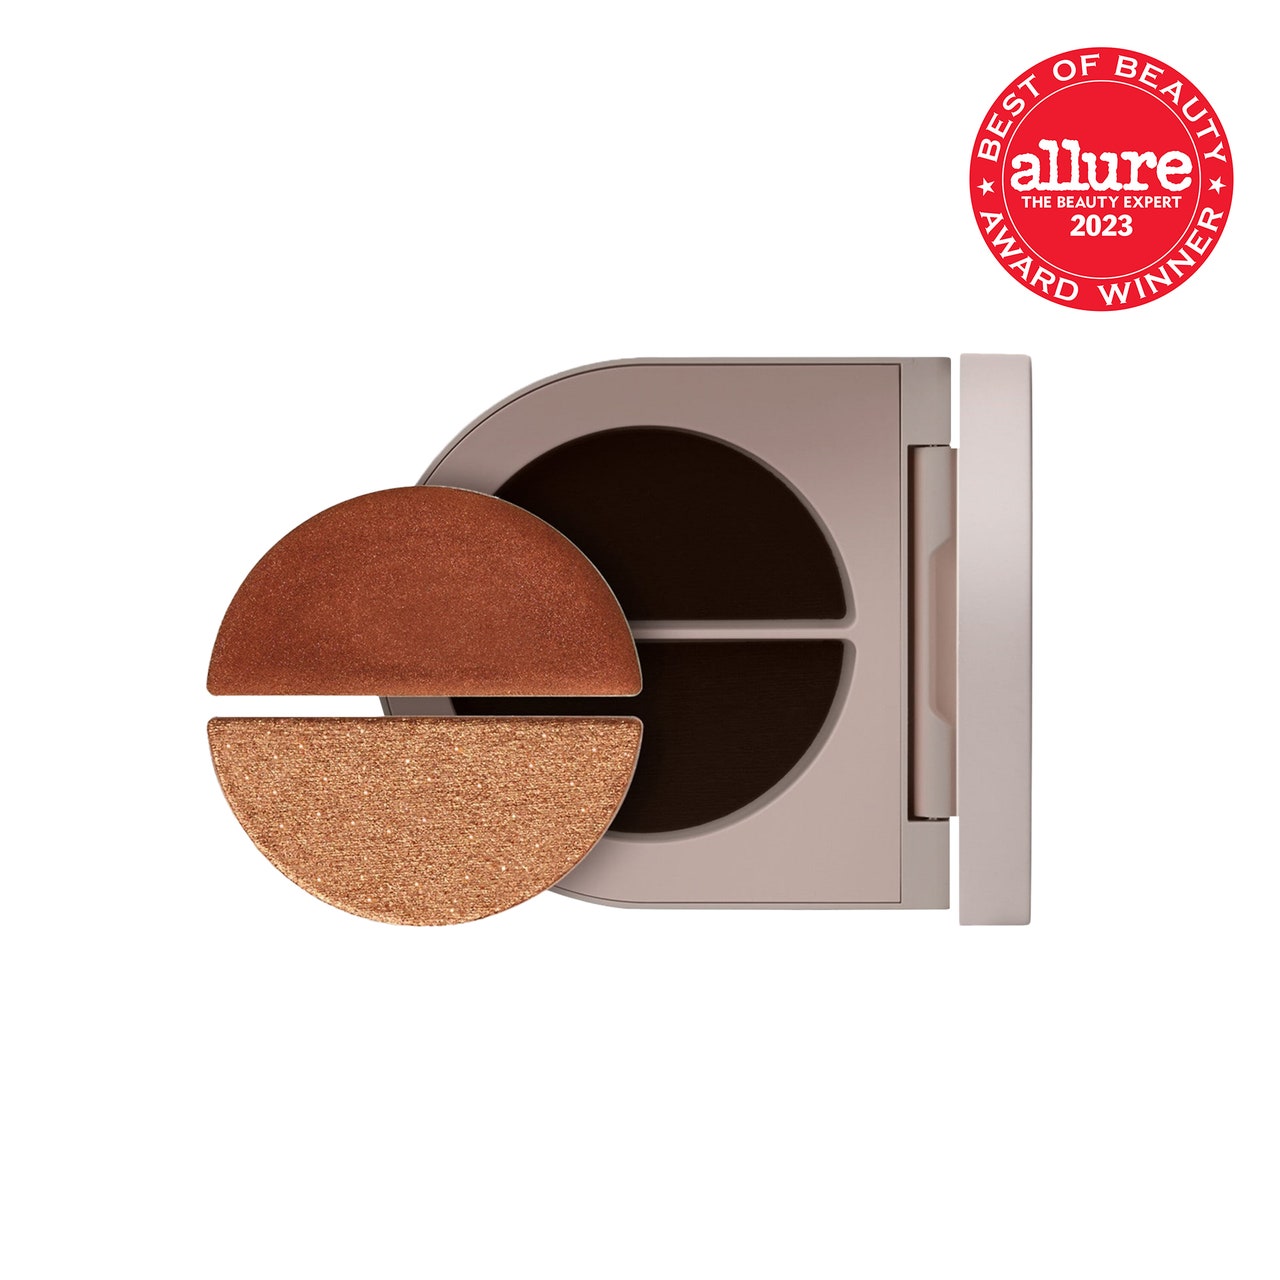 Topicals Slather Exfoliating Body Serum bronze eye shadow duo in pale bronze compact on white background with red Allure BoB seal in the top right corner